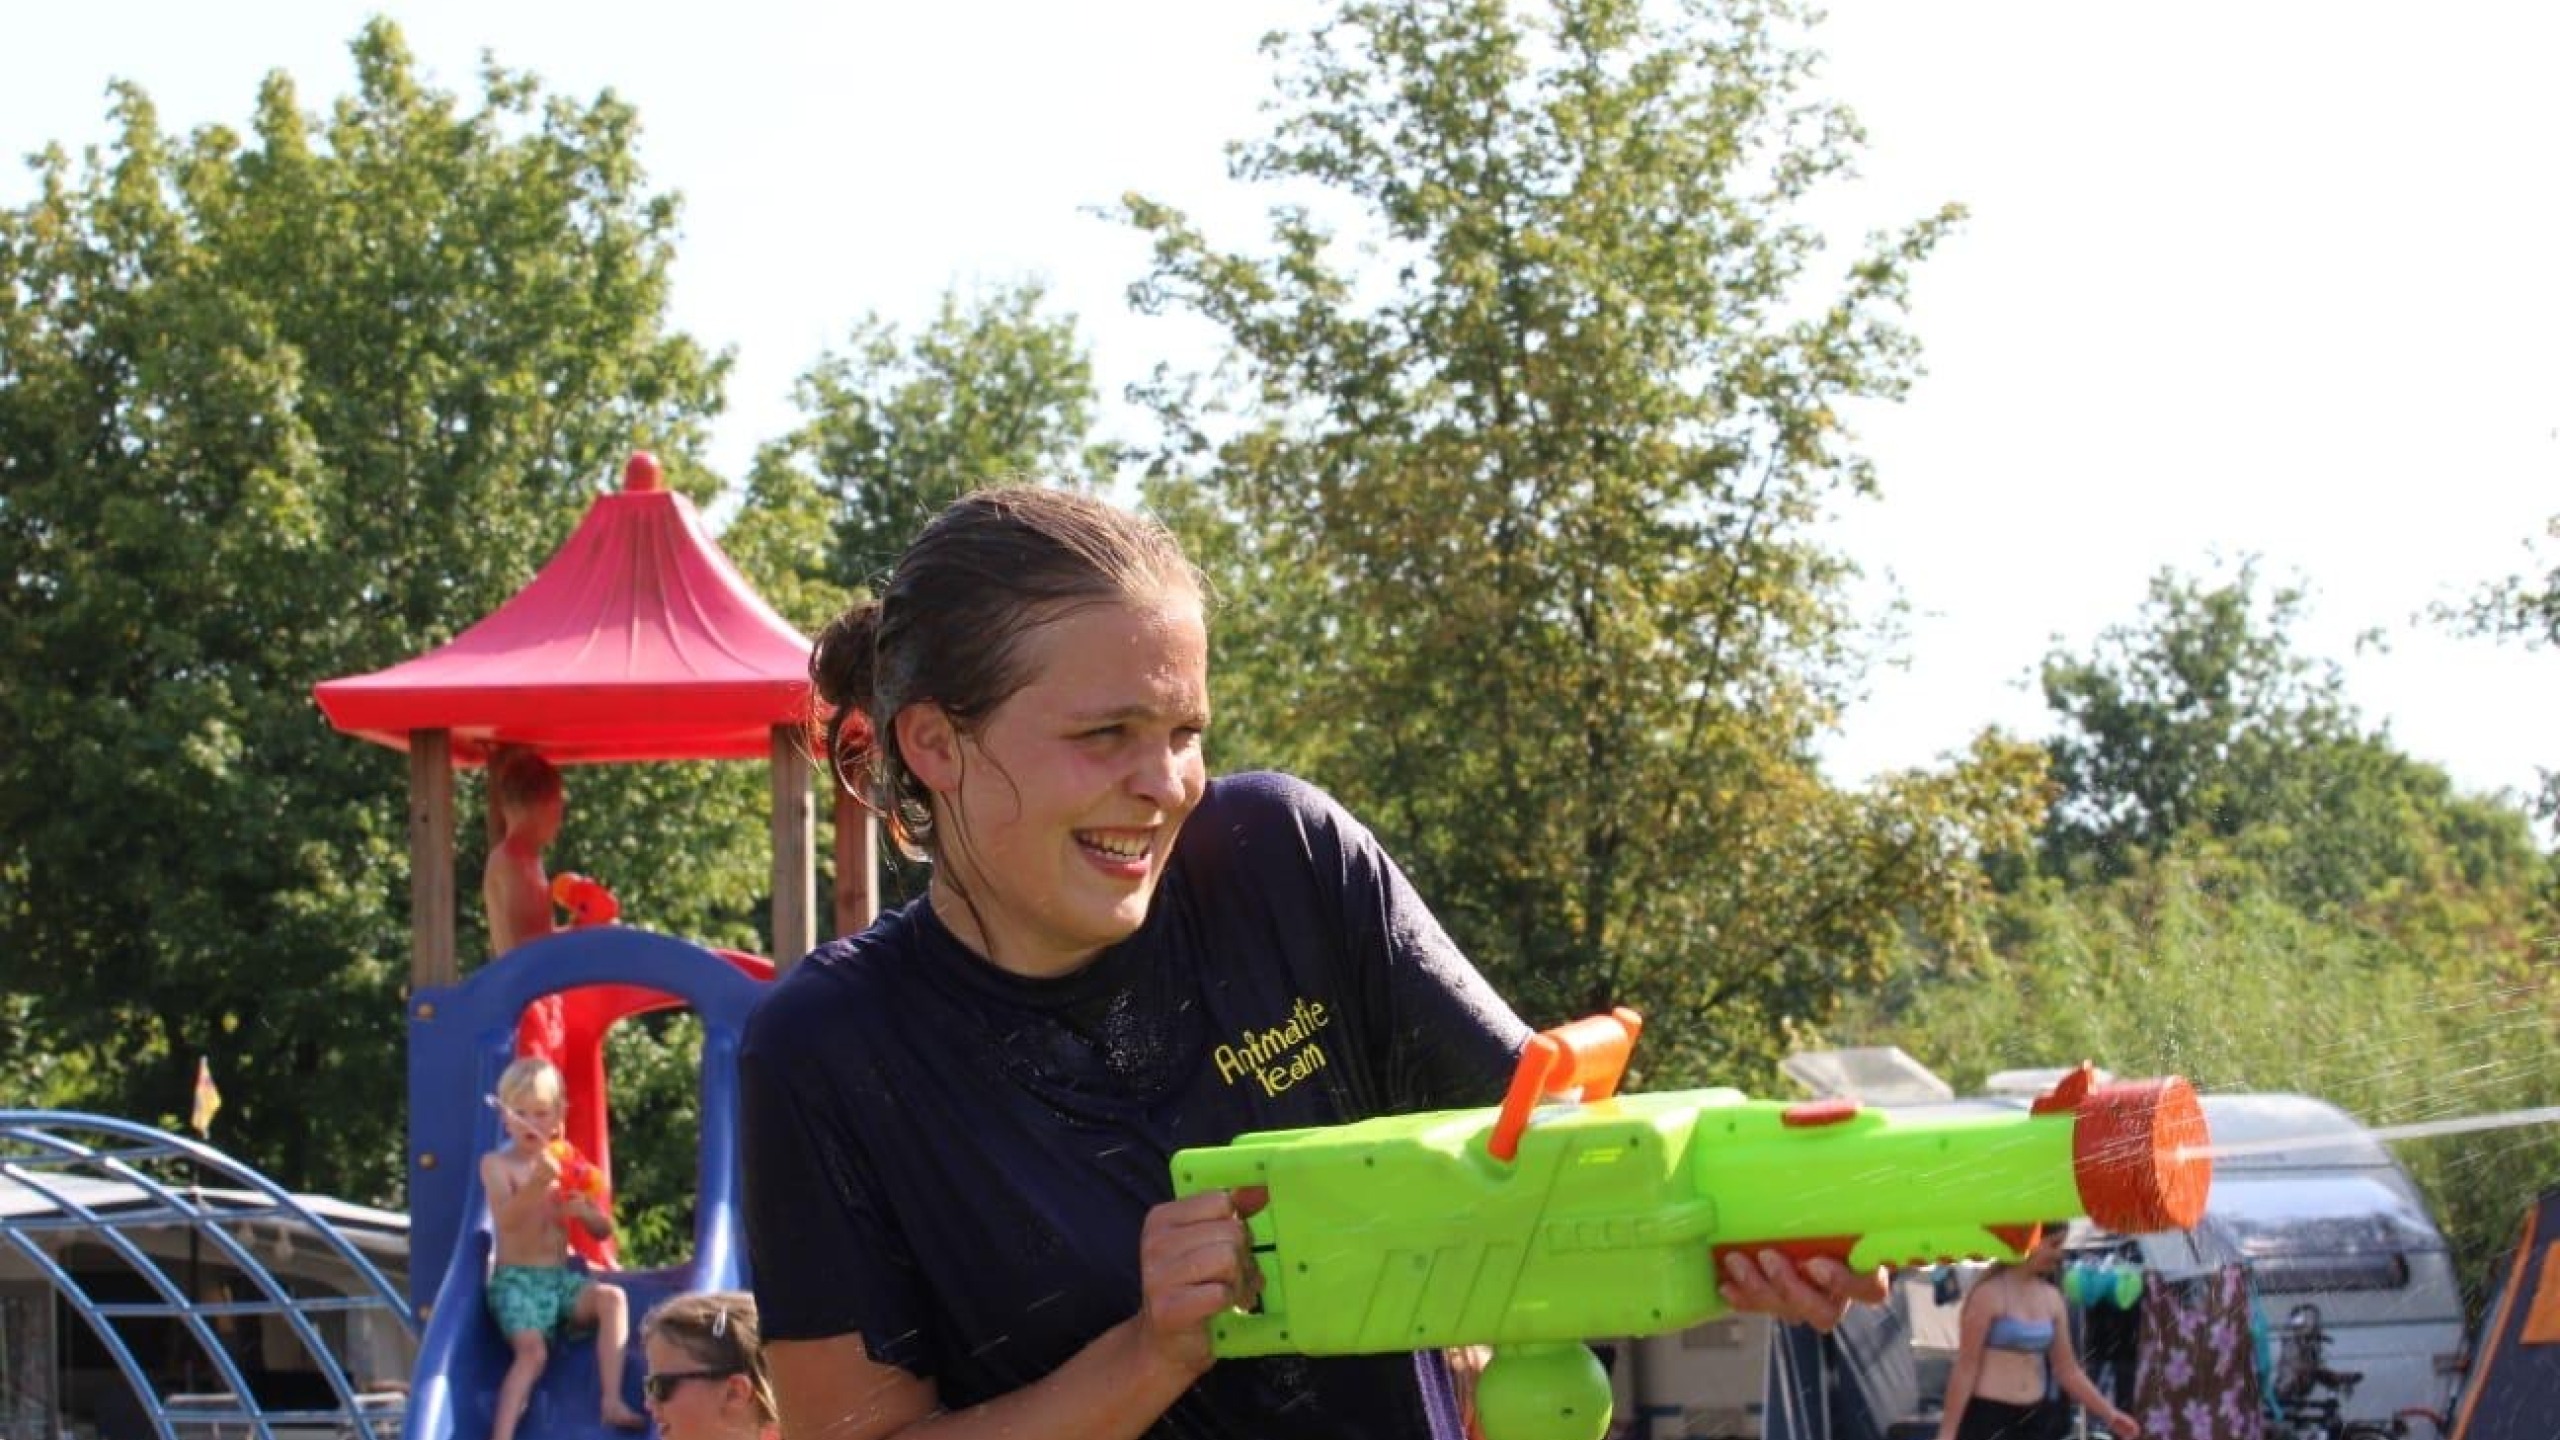 Zomers watergevecht entertainer